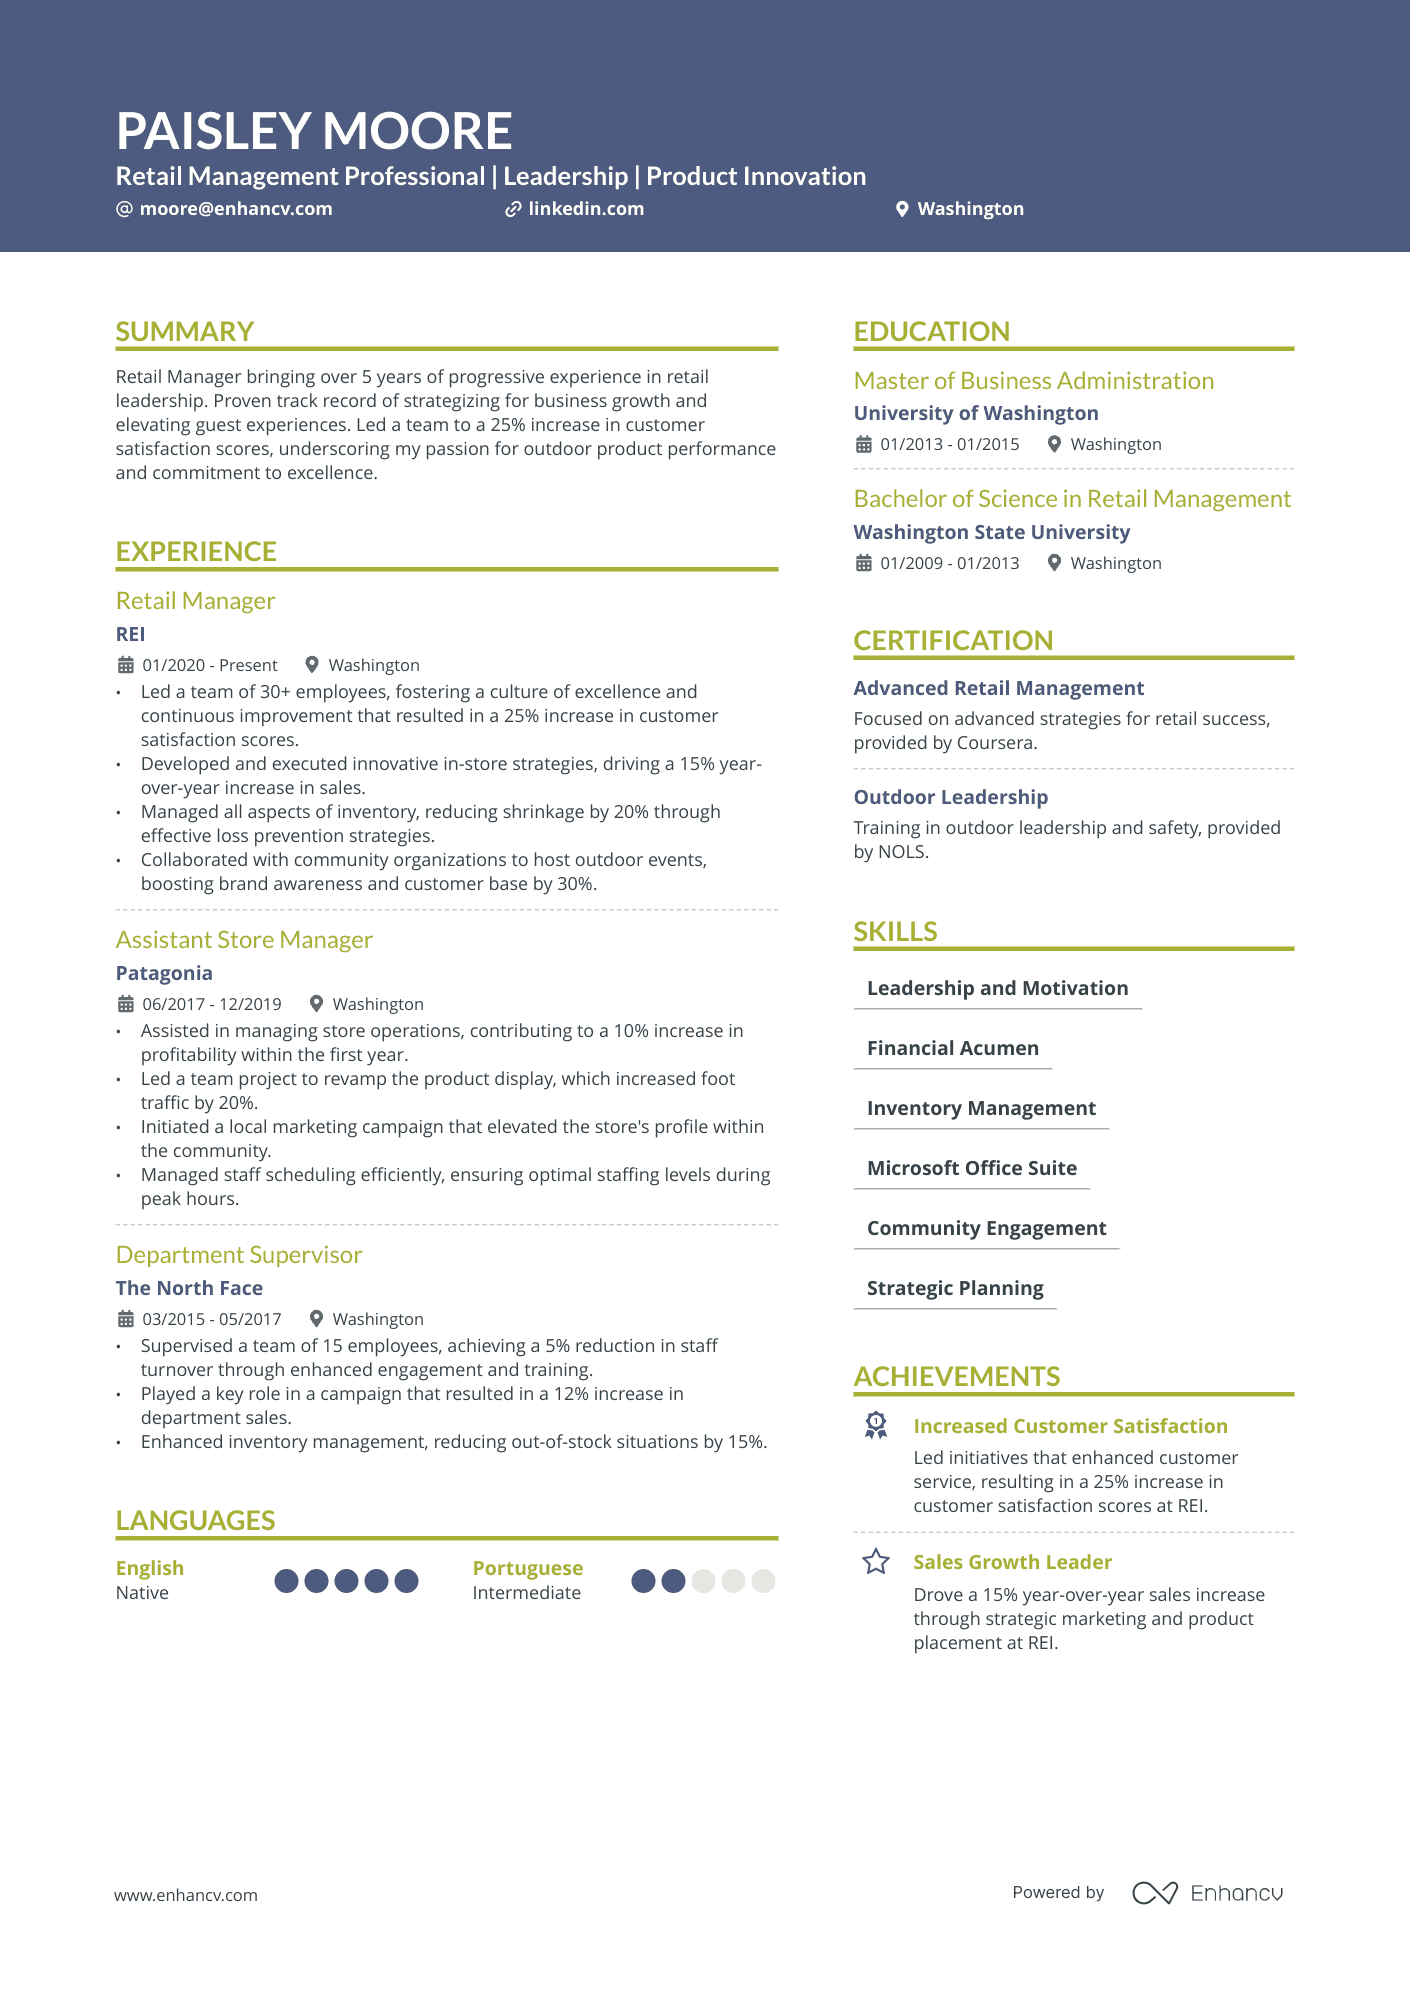 Retail Management Professional | Leadership | Product Innovation resume example